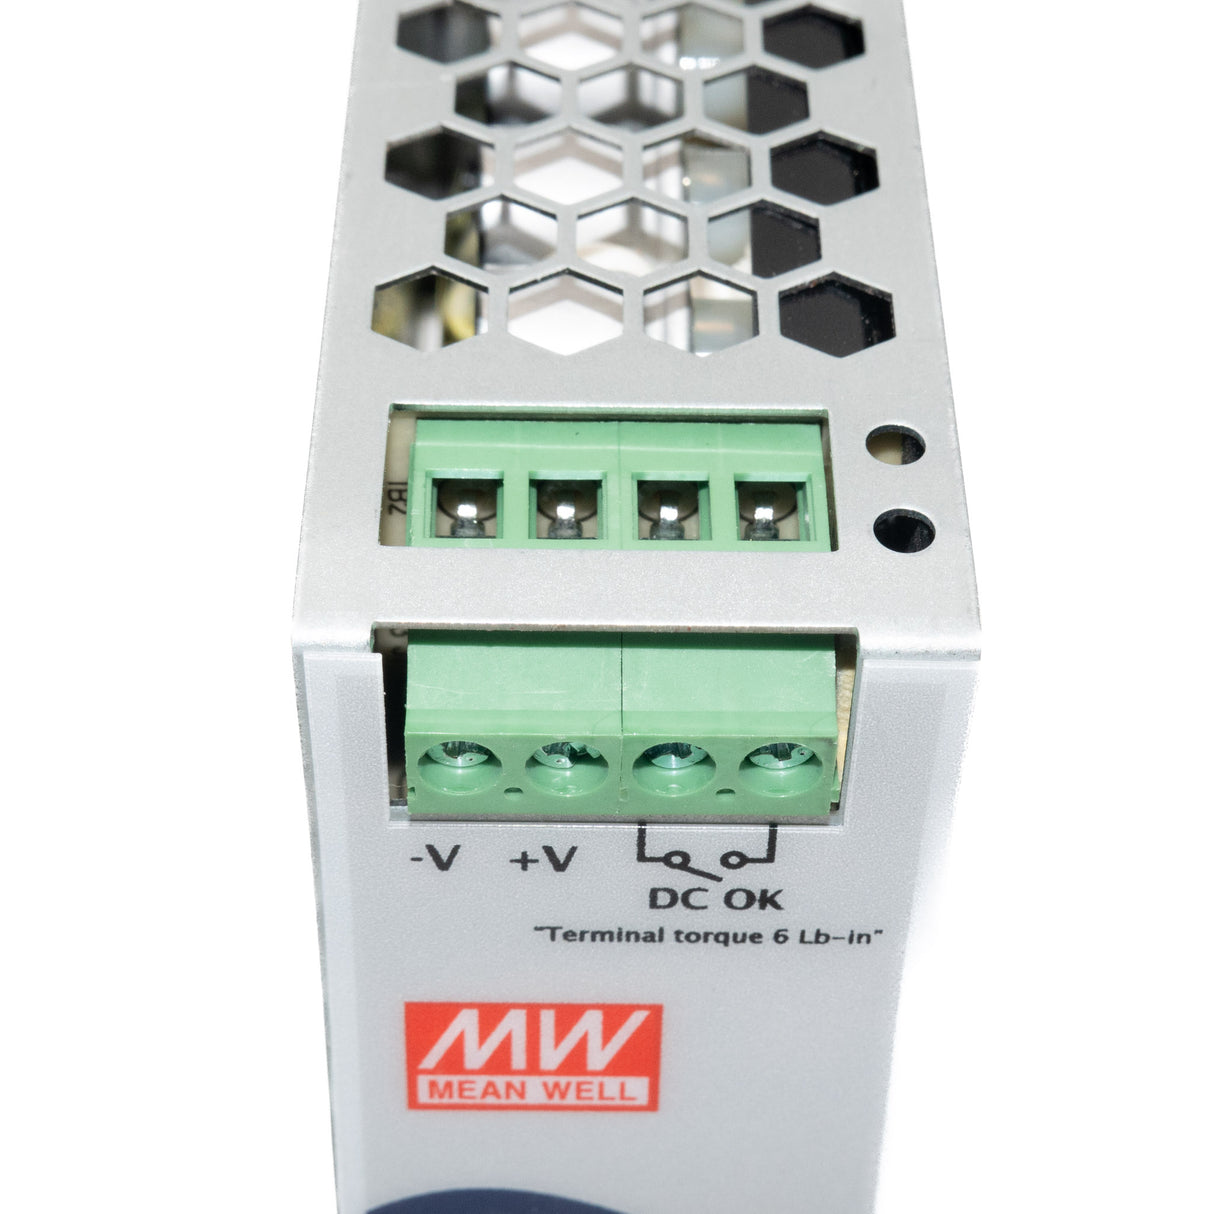 Mean Well WDR-60-24 Single Output Industrial Power Supply 60W 24V - DIN Rail - PHOTO 2